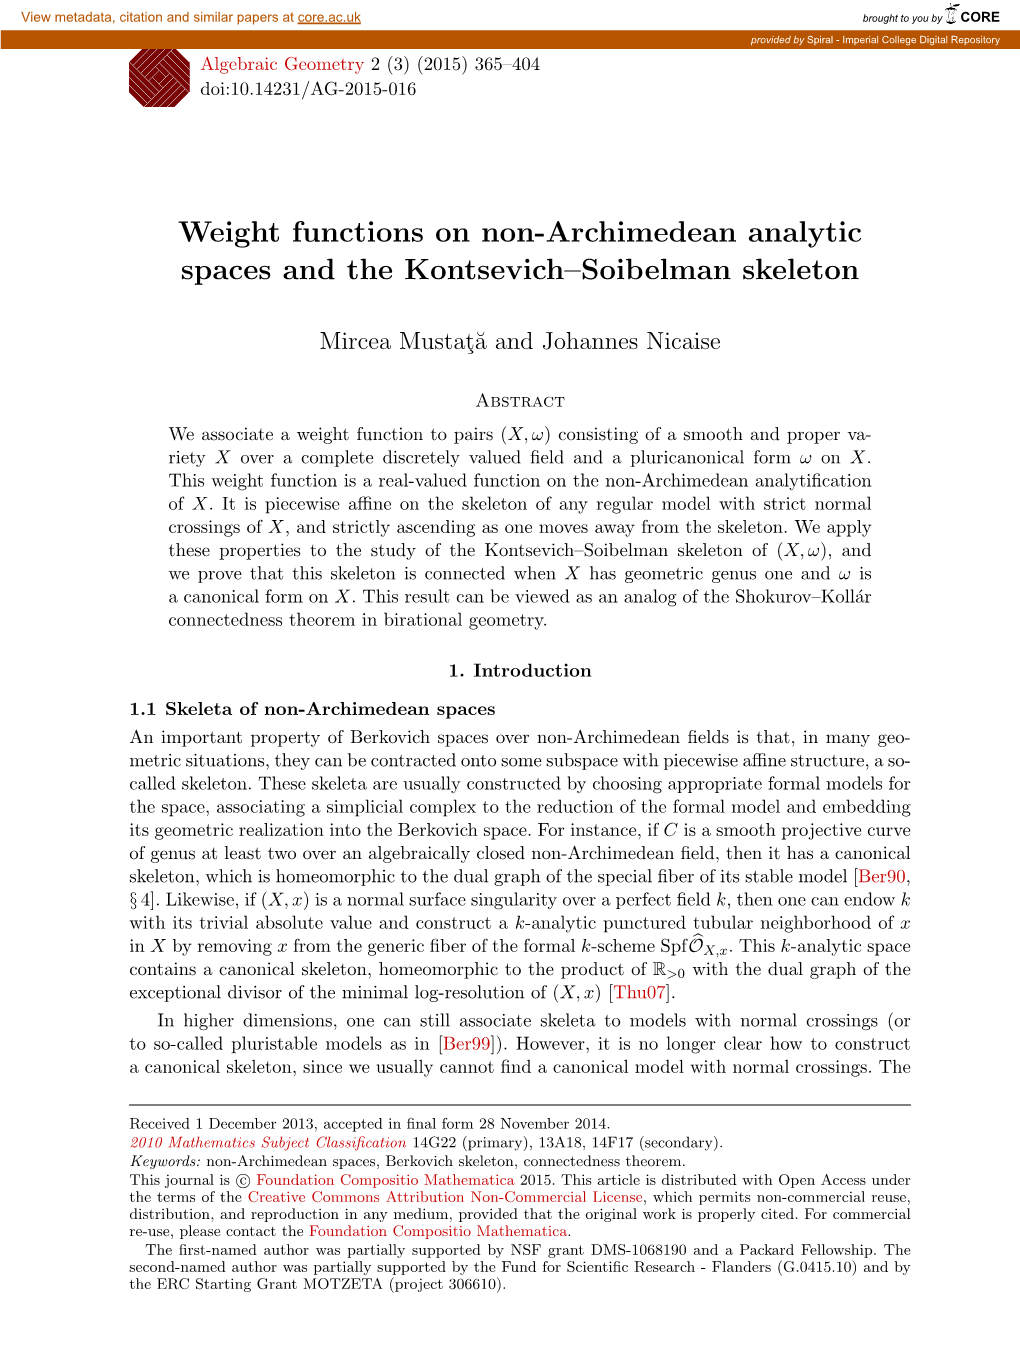 Weight Functions on Non-Archimedean Analytic Spaces and the Kontsevich–Soibelman Skeleton